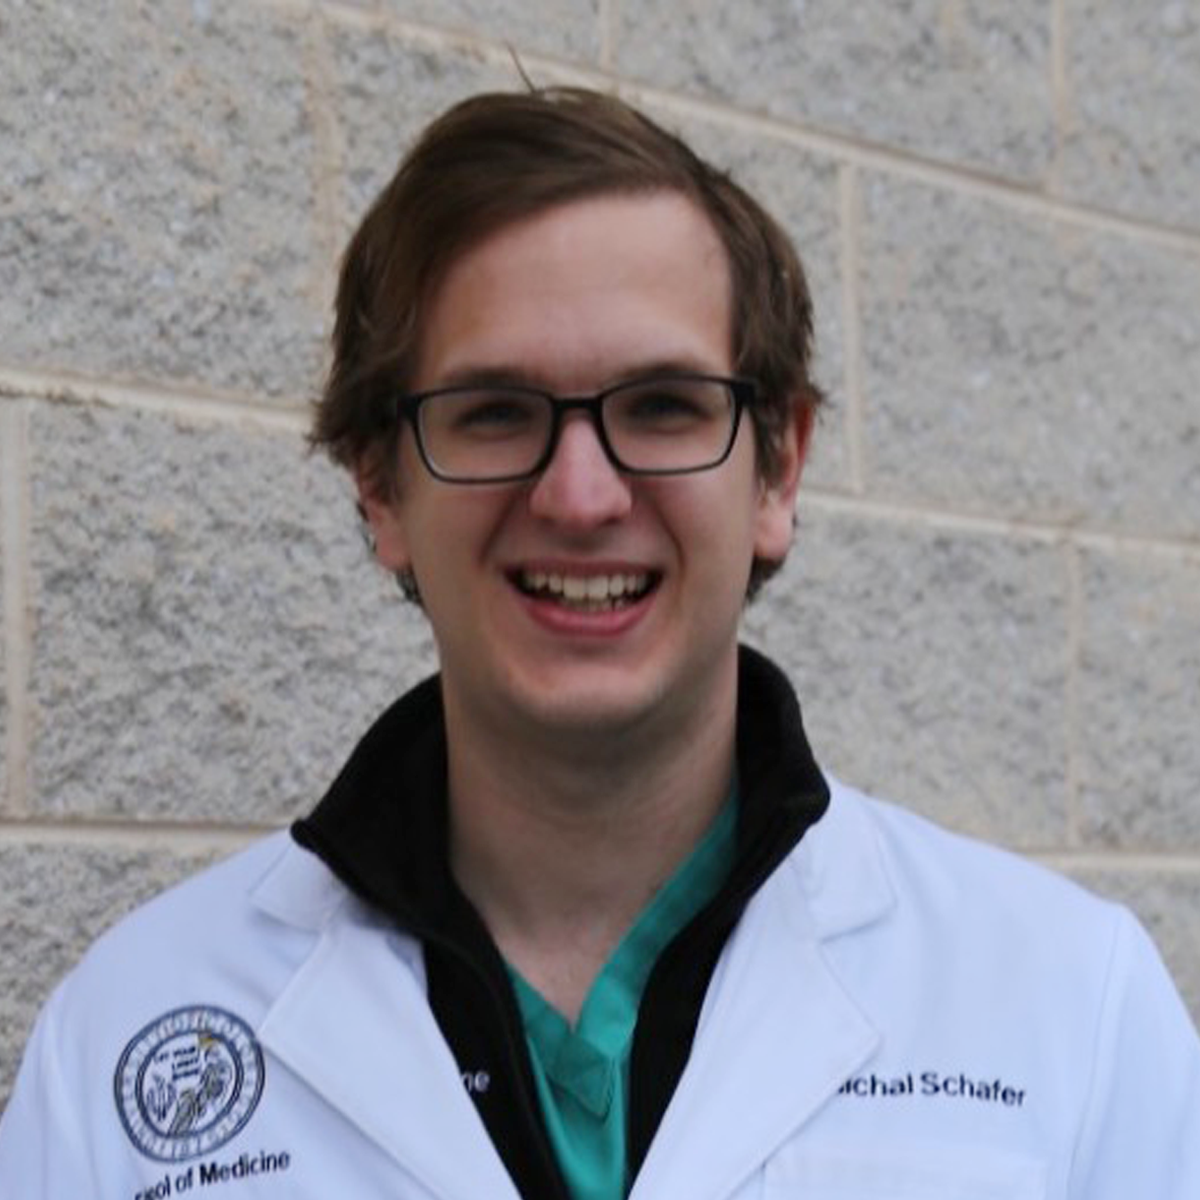 Michal Schäfer, medical scholar. He is smiling at the camera. He is wearing a white medical coat and standing outdoors in front of a gray brick wall.